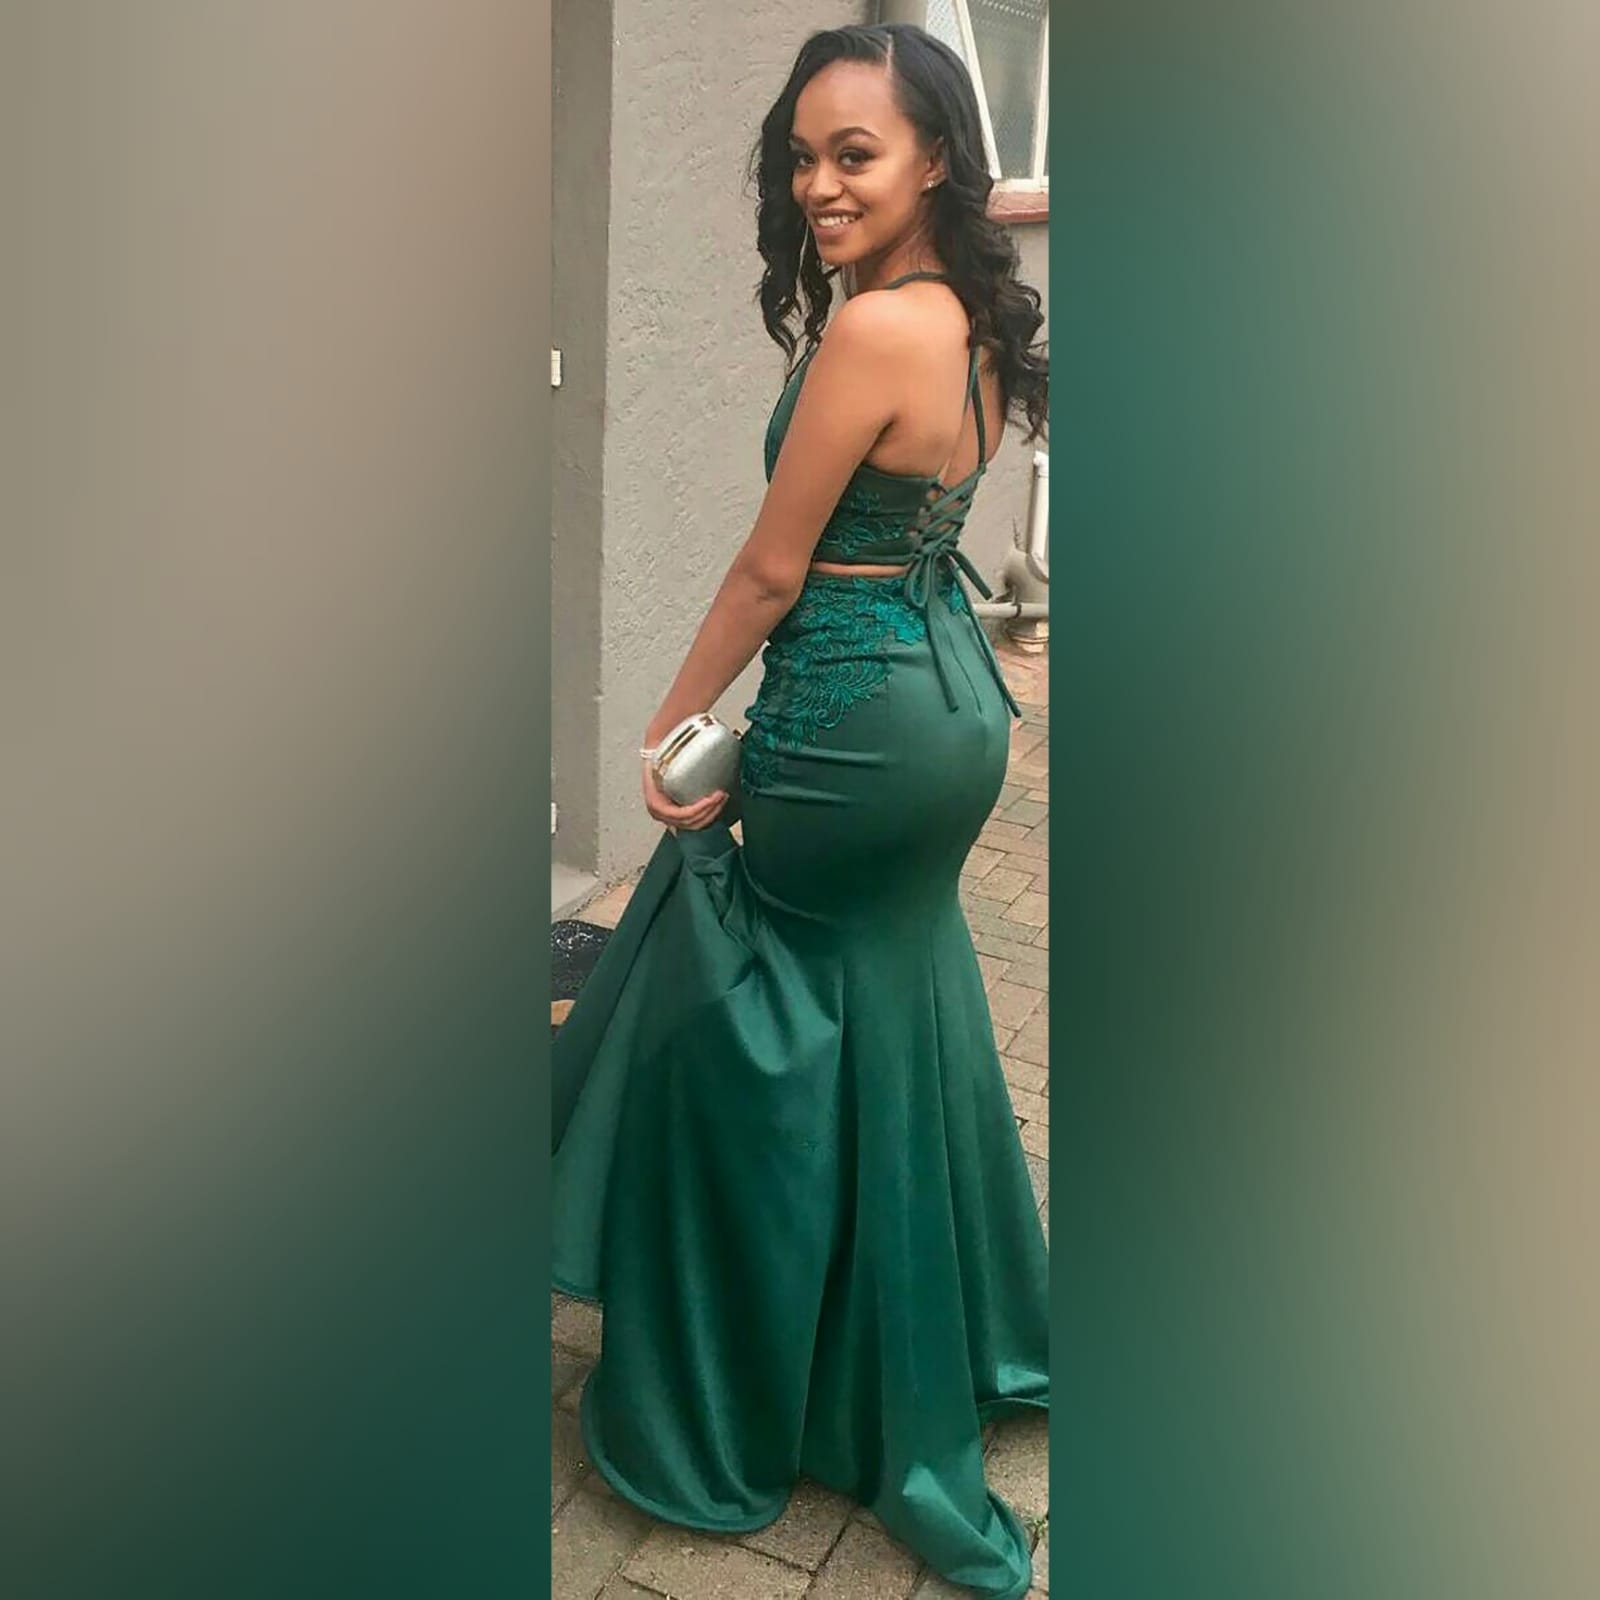 2 piece emerald green mermaid prom dress 1 2 piece emerald green mermaid prom dress. A gorgeous crop top with a lace-up open back, with a mermaid skirt. Lace detail on skirt and top for a classic touch.